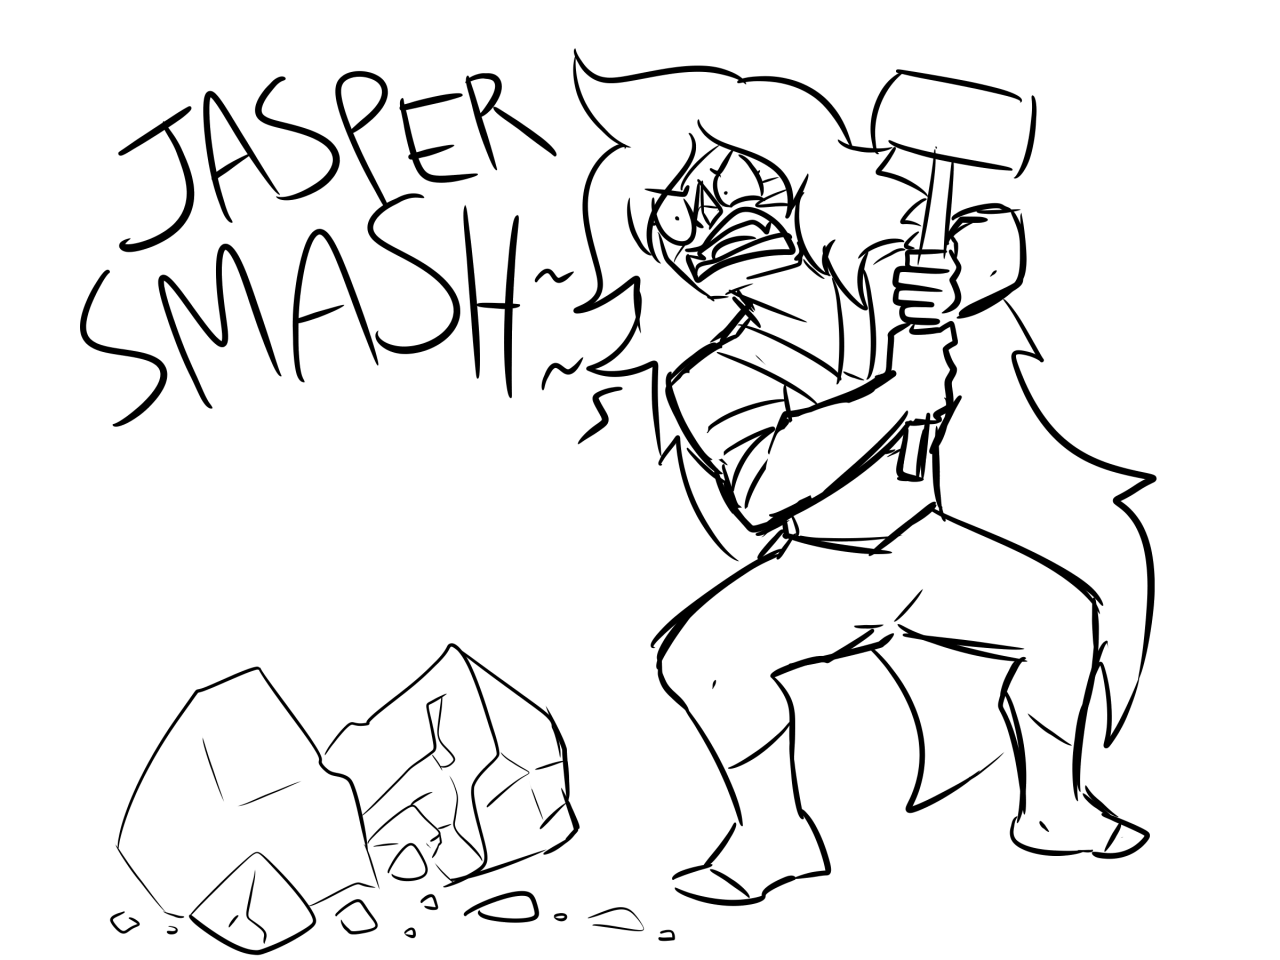 Anonymous said: Jasper with a huge hammer smashing a rock Answer: What did that rock ever do to you Jasper